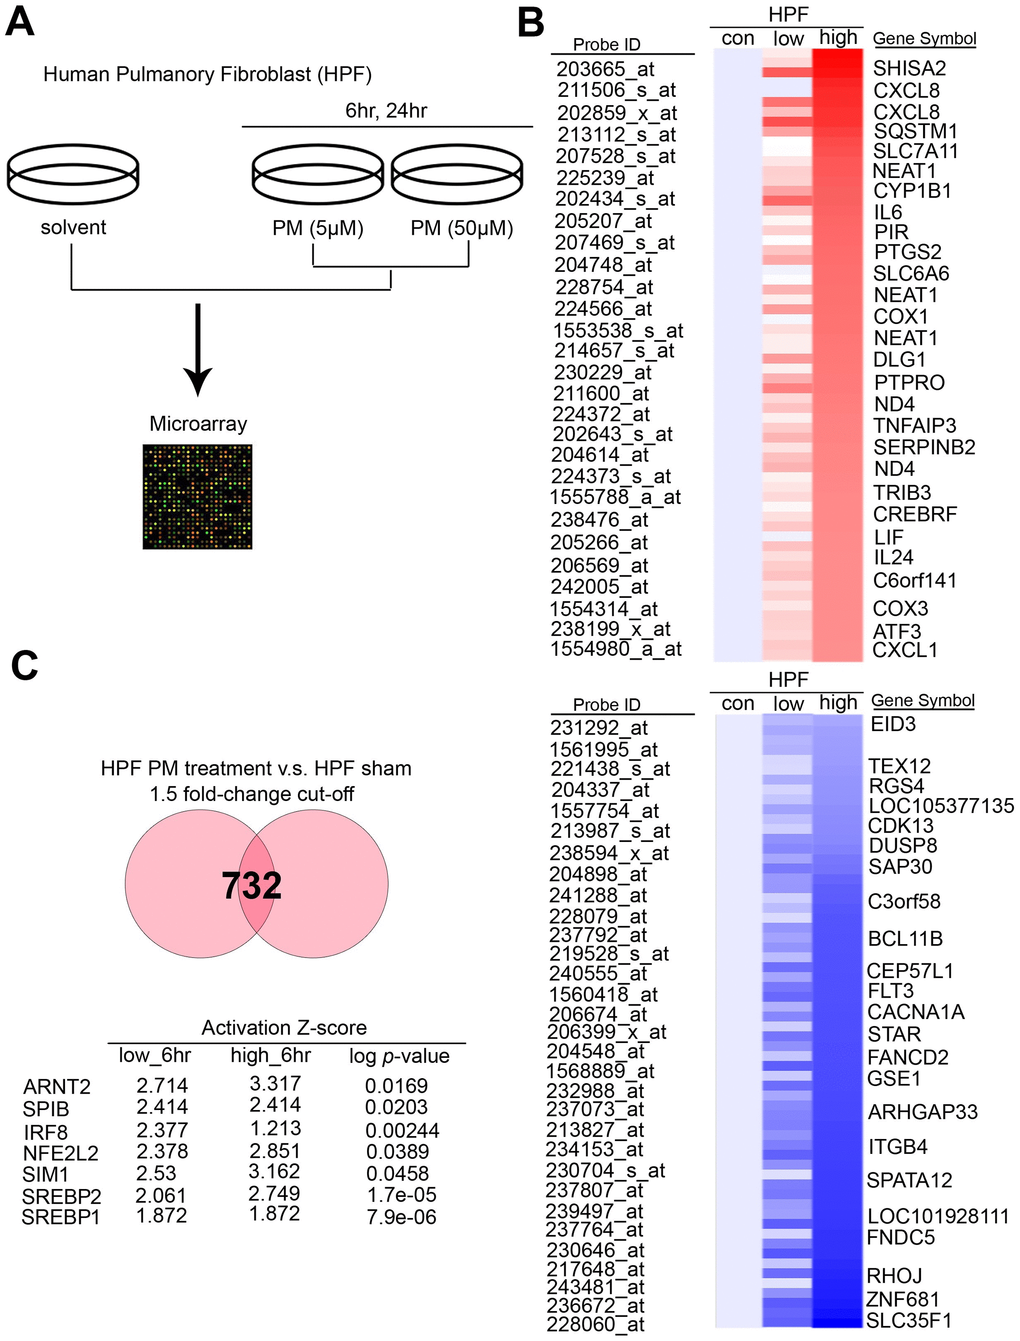 PM induced several potential transcription factors in a dose-dependent manner in normal lung cells. (A) The flowchart represents the procedure of microarray chips established in human pulmonary fibroblasts. (B) Detailed heatmaps highlight the significantly up- and down-regulated genes after PM treatment, that were normalized gene expression from the microarray database analysis. (C) The ranking of candidate transcription factors by IPA database of microarray from PM treatment compared with the sham group in human pulmonary fibroblasts. The cut-off was a 1.5-fold change.